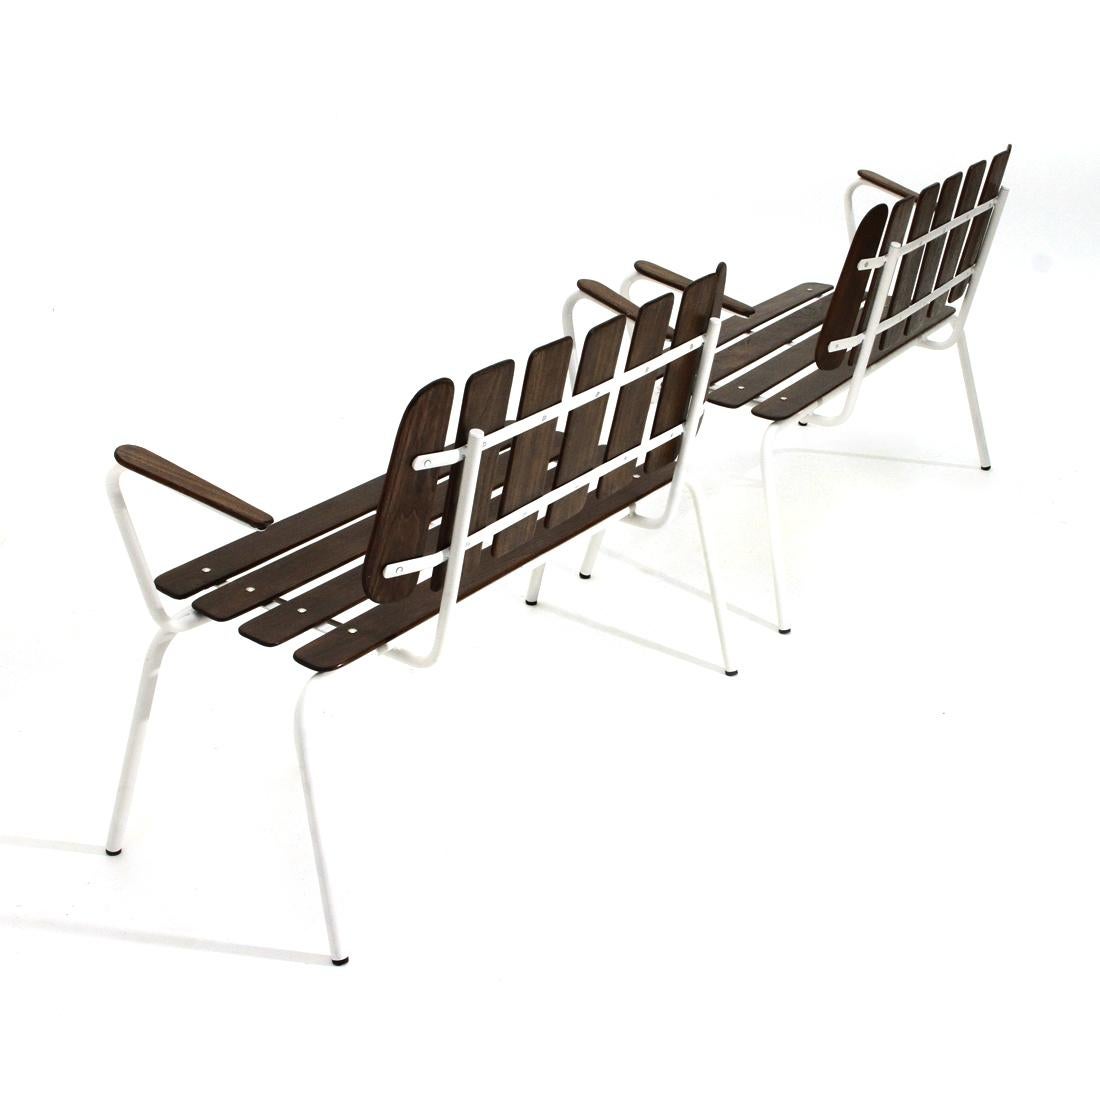 Pair of White Metal Benches with Wooden Slats, 1950s For Sale 1